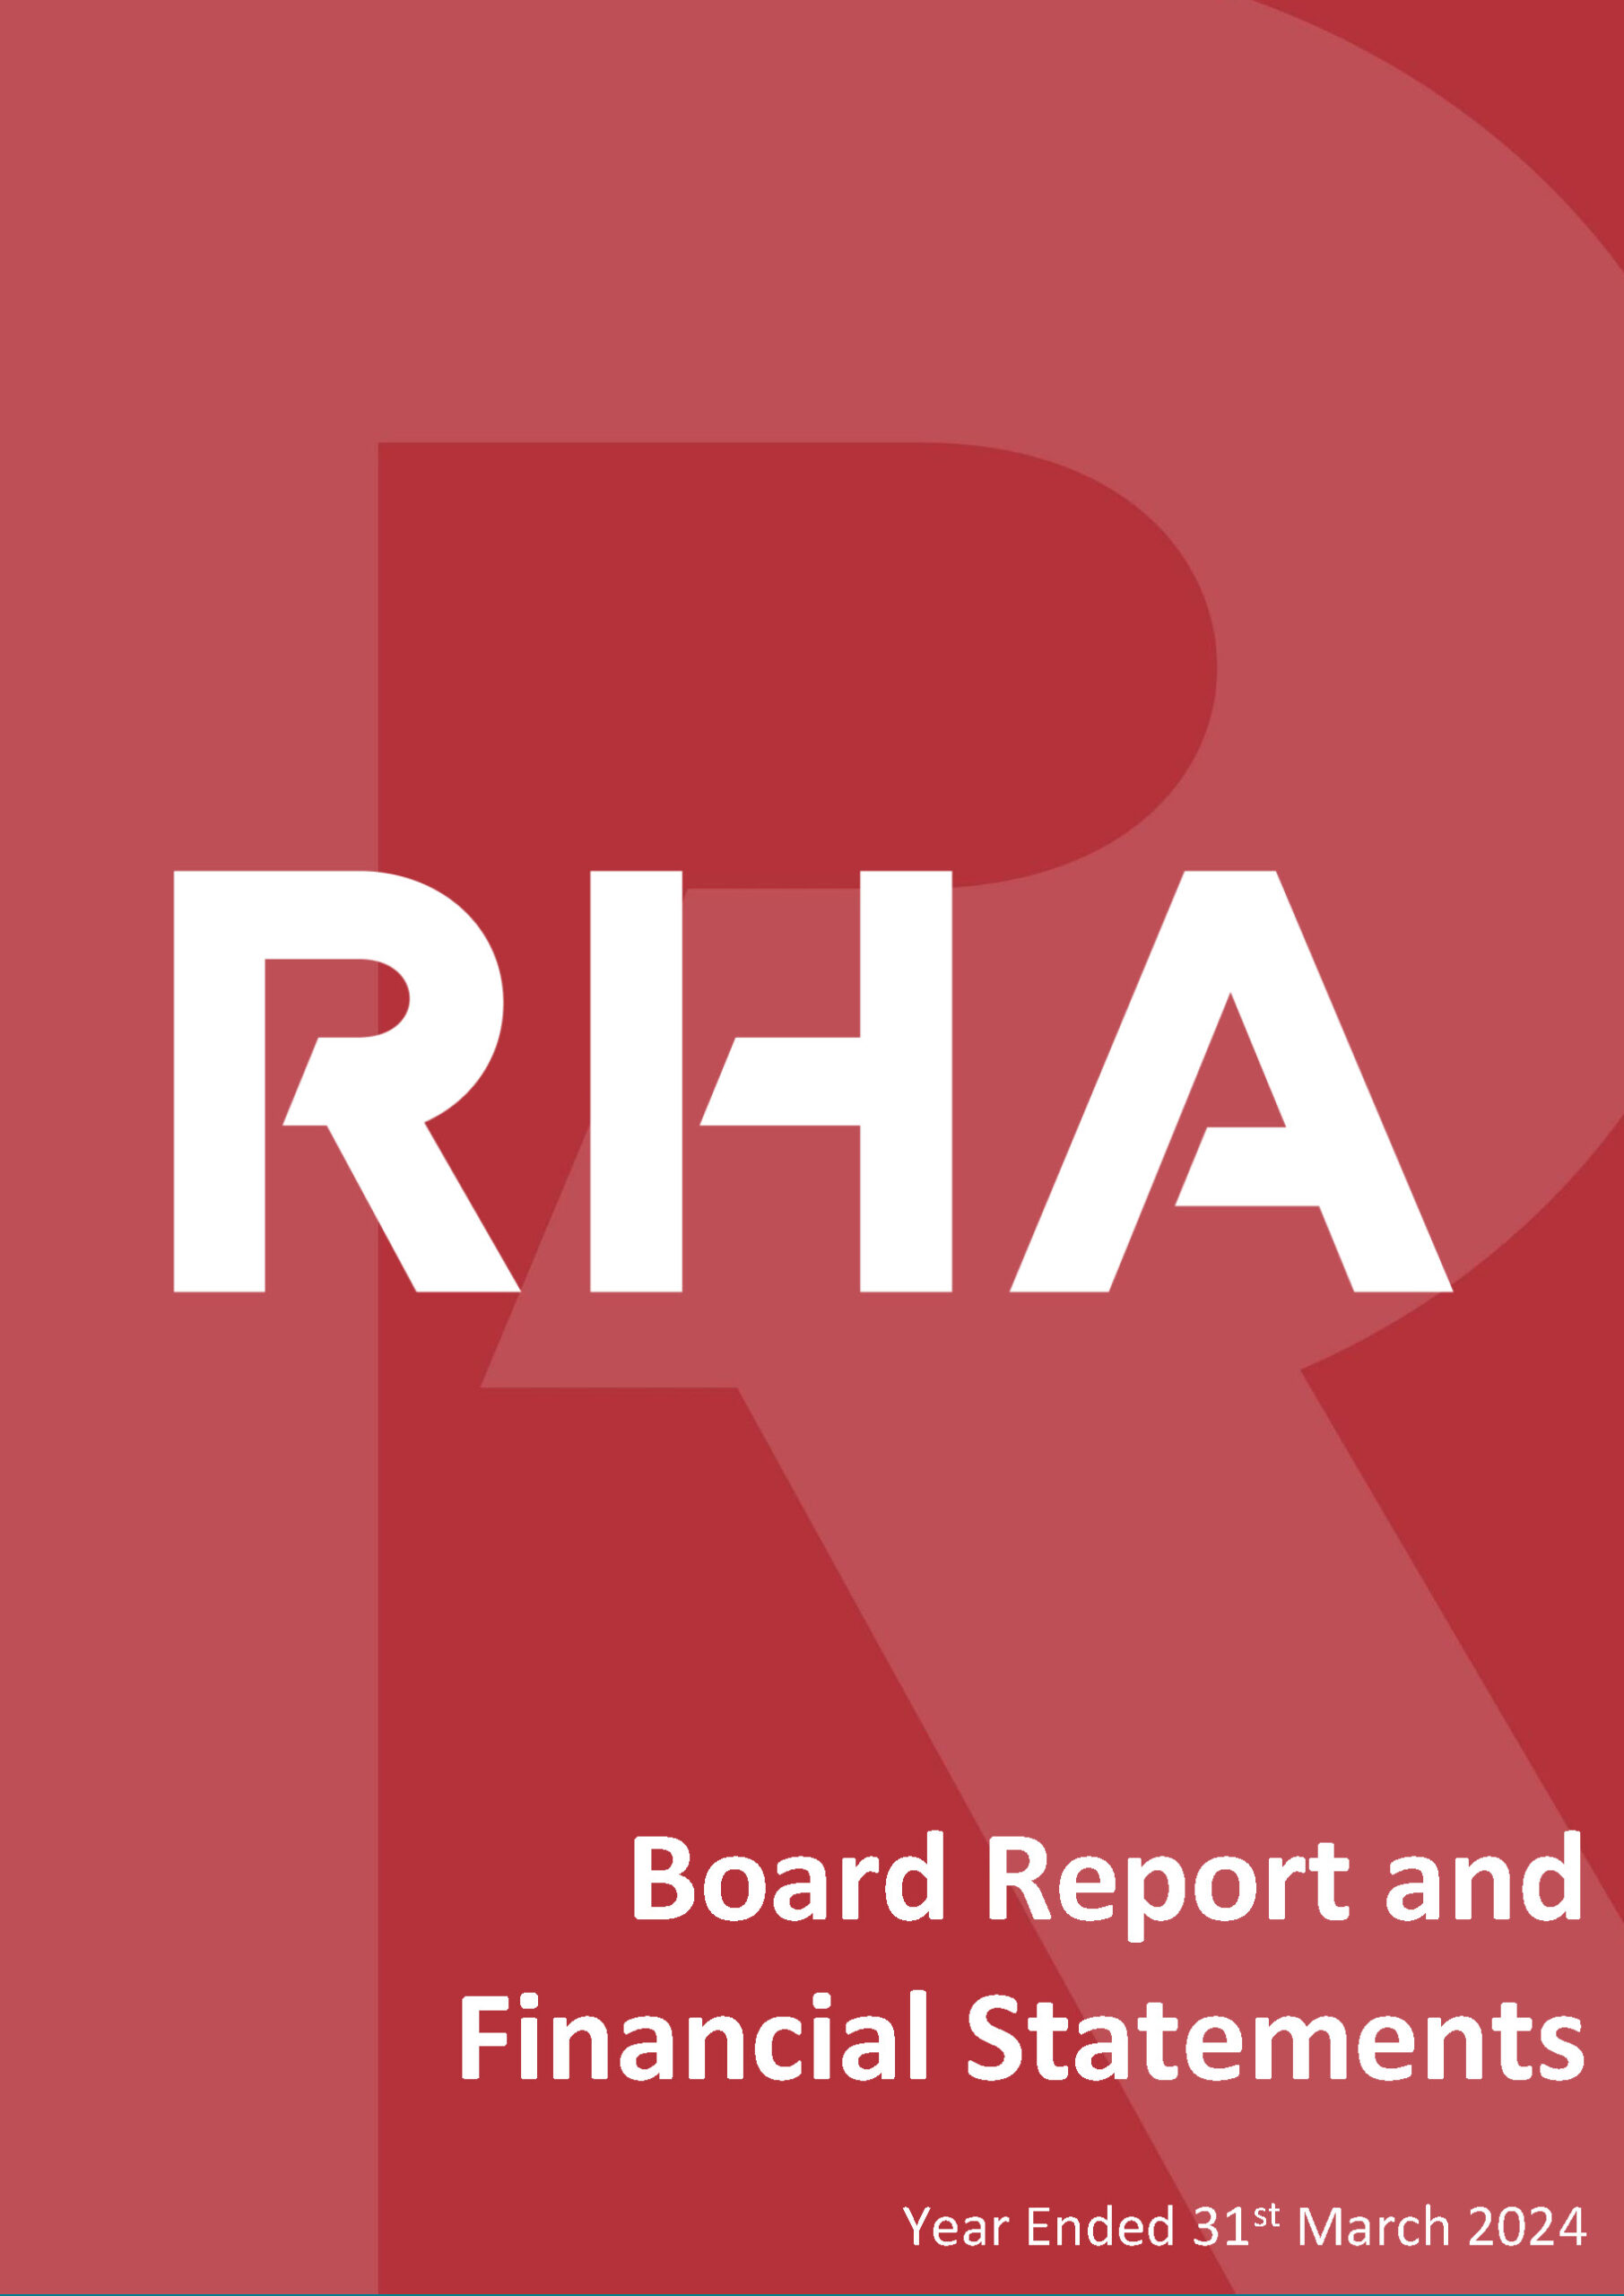 Financial Statements 2023 – 2024 – *subject to RHA shareholder approval